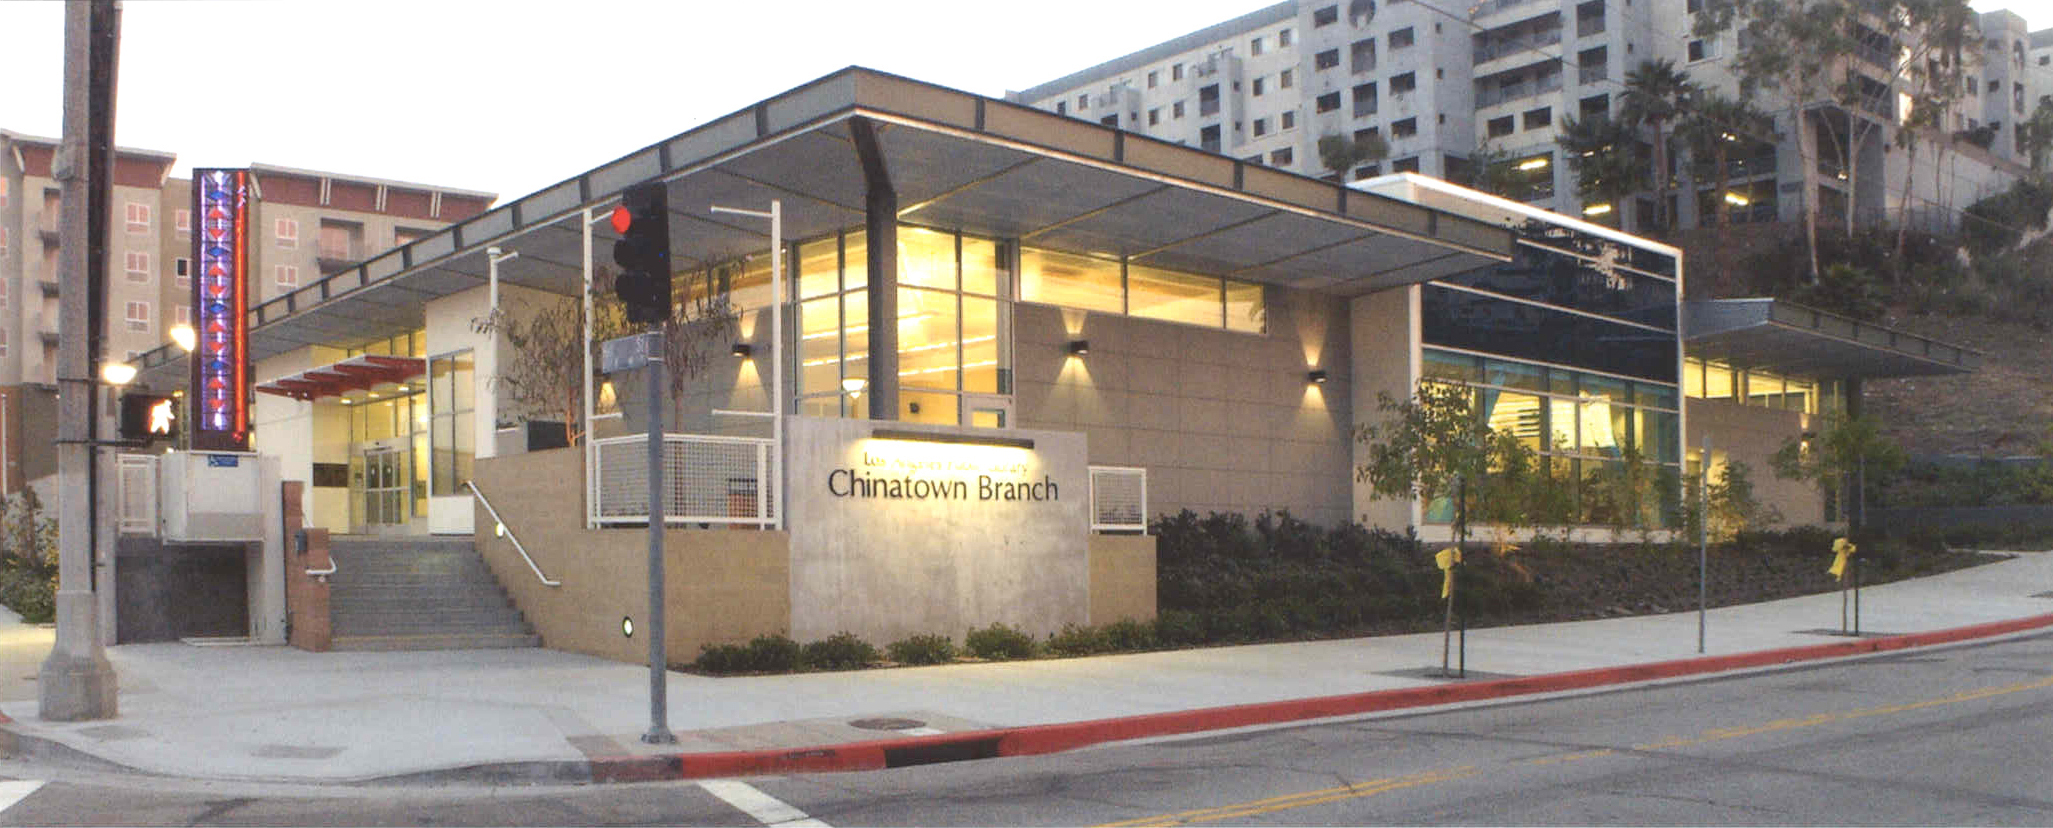 Chinatown Branch Library 